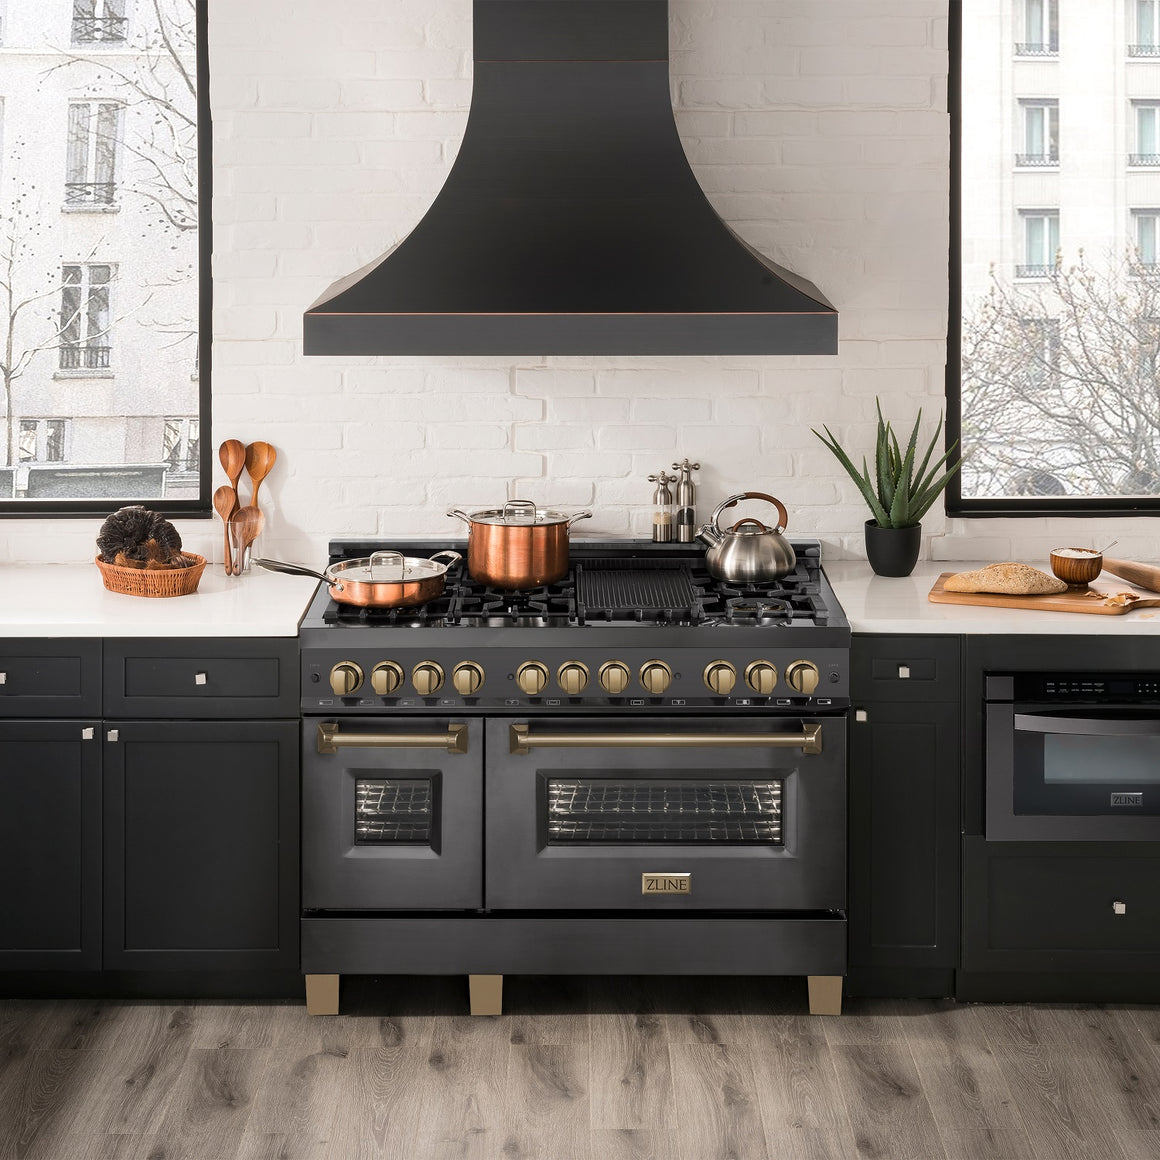 ZLINE Autograph Edition 48" 6.0 cu. ft. Dual Fuel Range in Black Stainless Steel with Champagne Bronze Accents